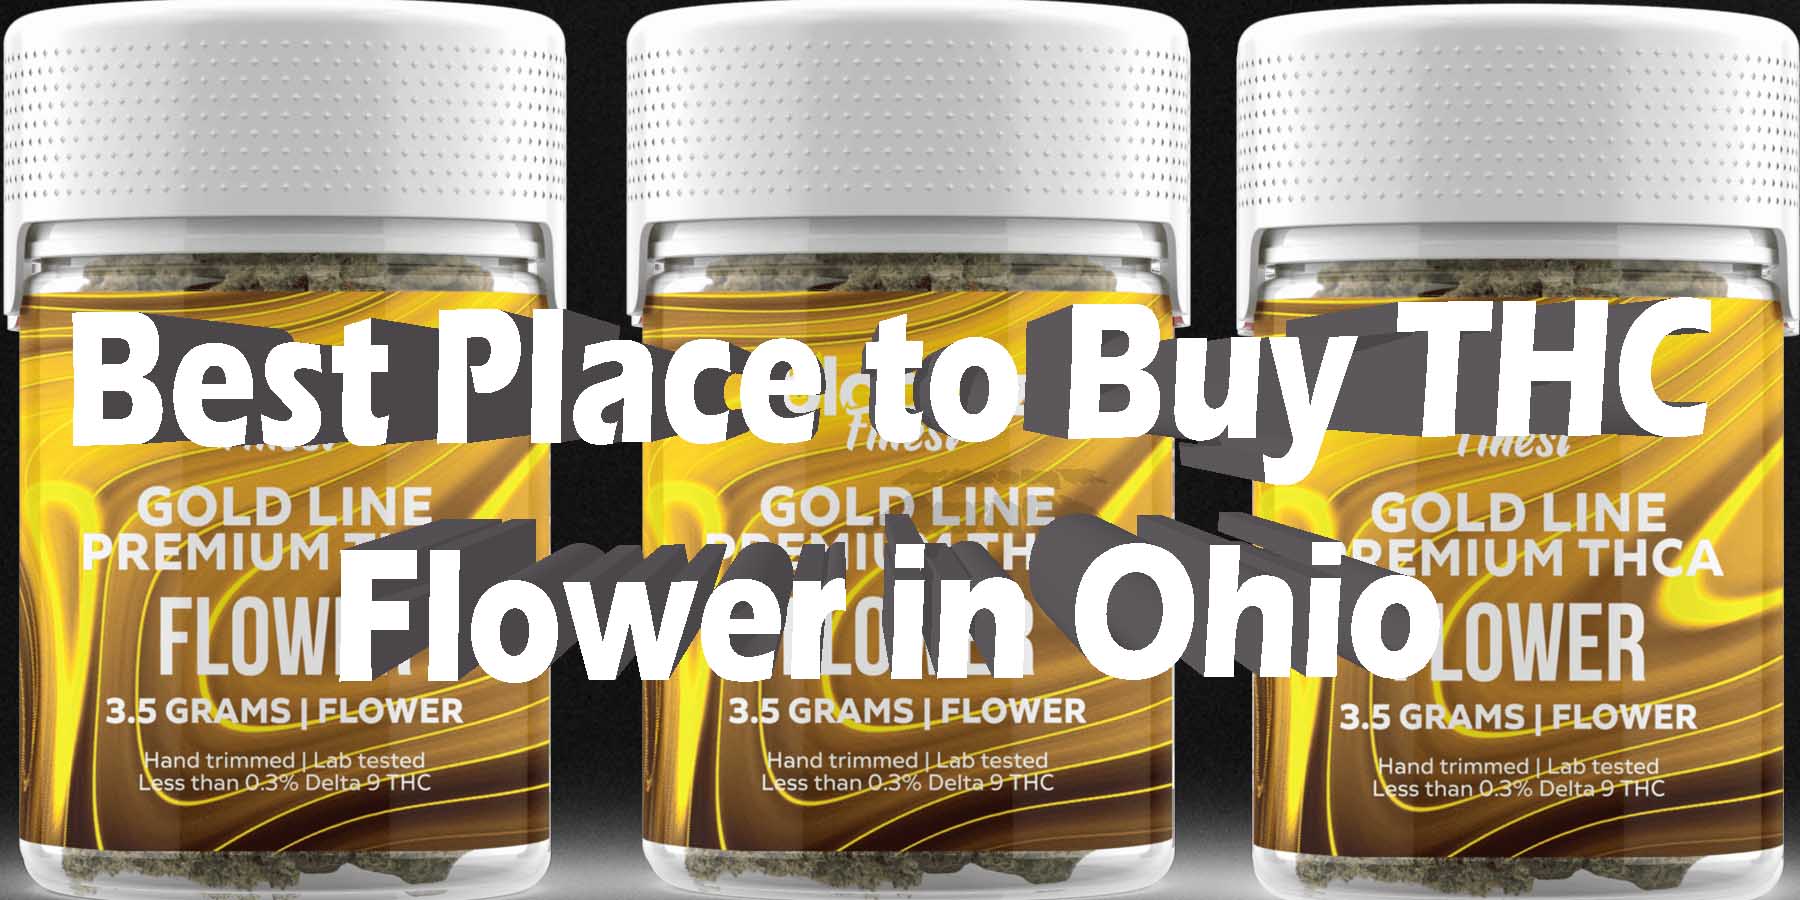 Best Place to Buy THC Flower in Ohio WhereToGet HowToGetNearMe-BestPlace LowestPrice Coupon Discount For Smoking Best High Smoke Shop Online Near Me StrongestBrand BestBrand Binoid